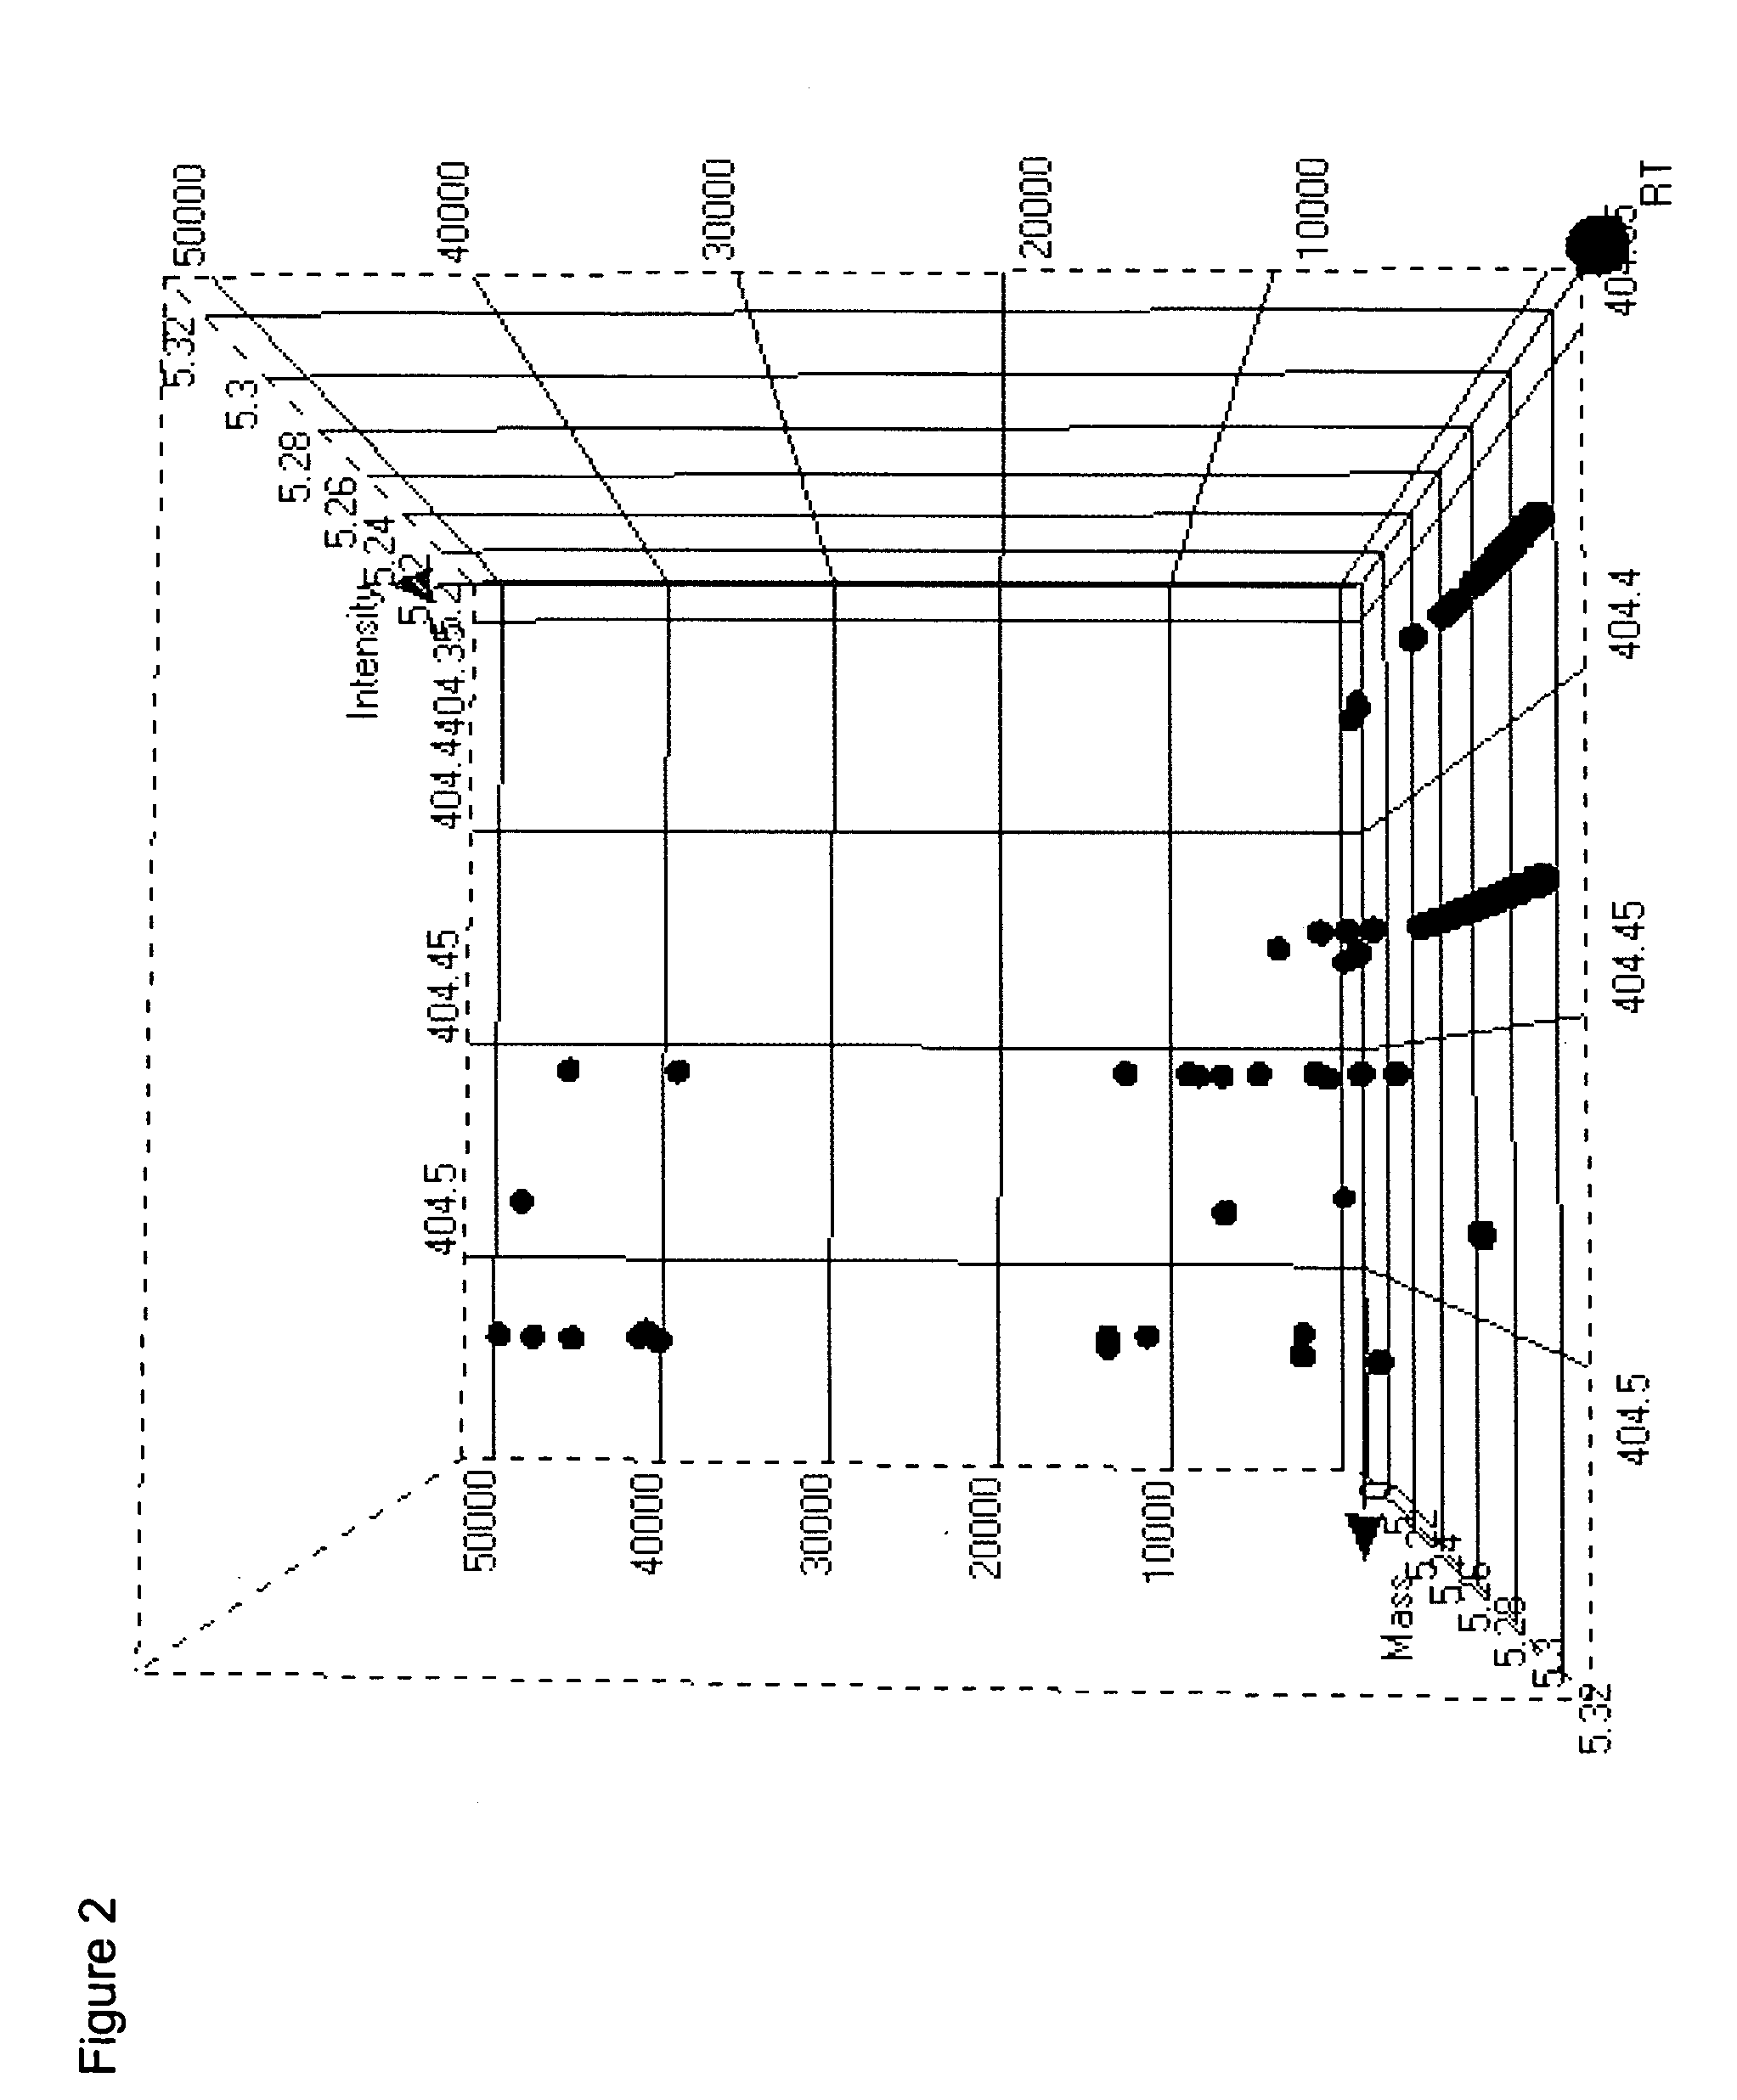 System and methods for non-targeted processing of chromatographic data